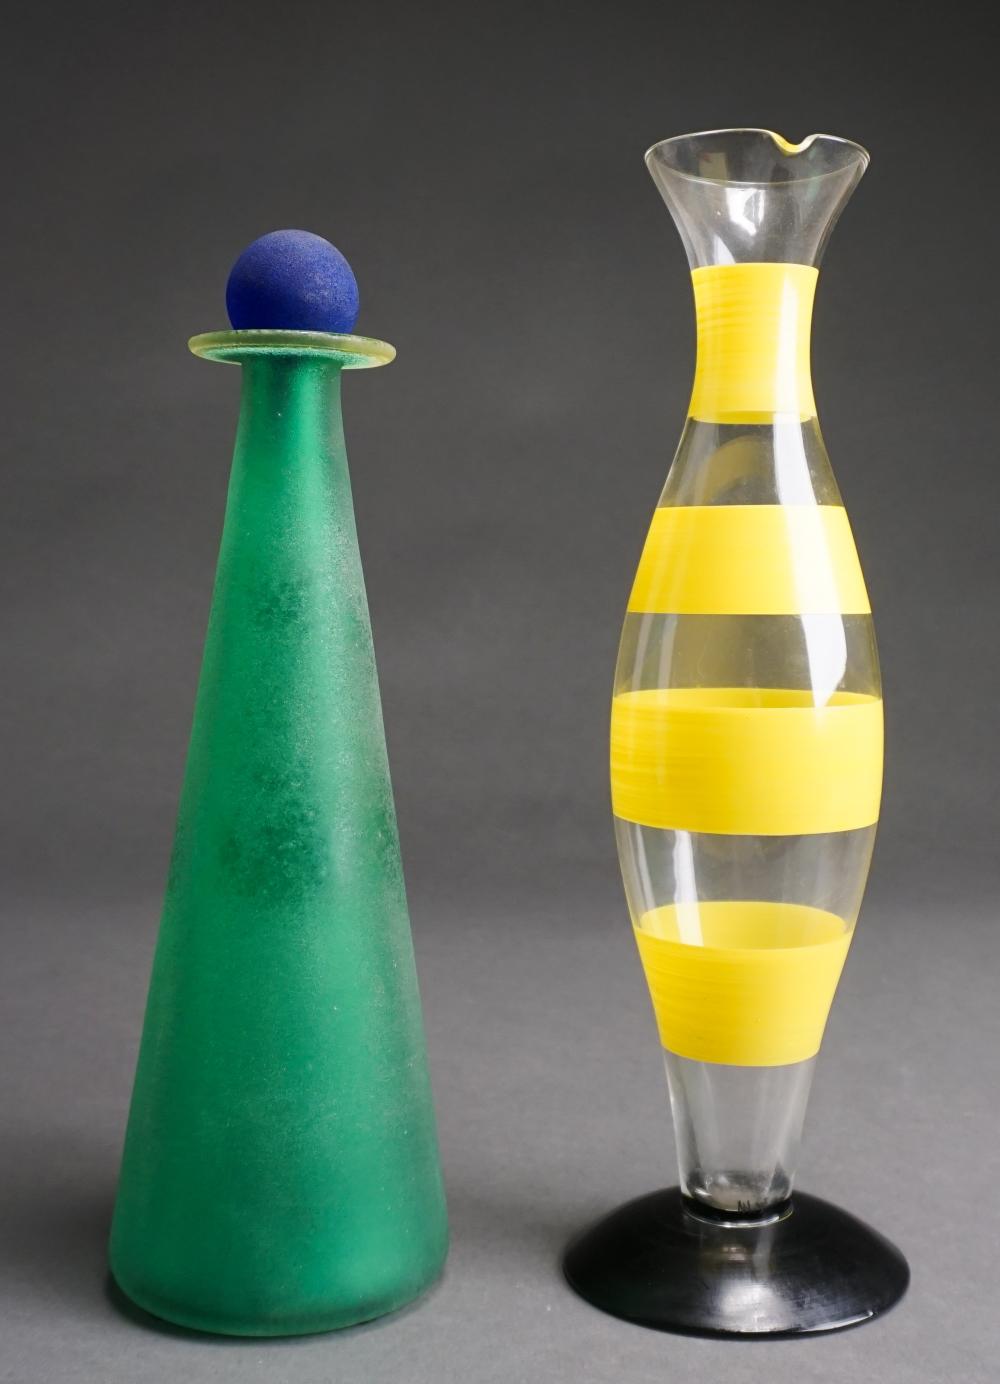 CONTEMPORARY GLASS PITCHER AND 32f1b4